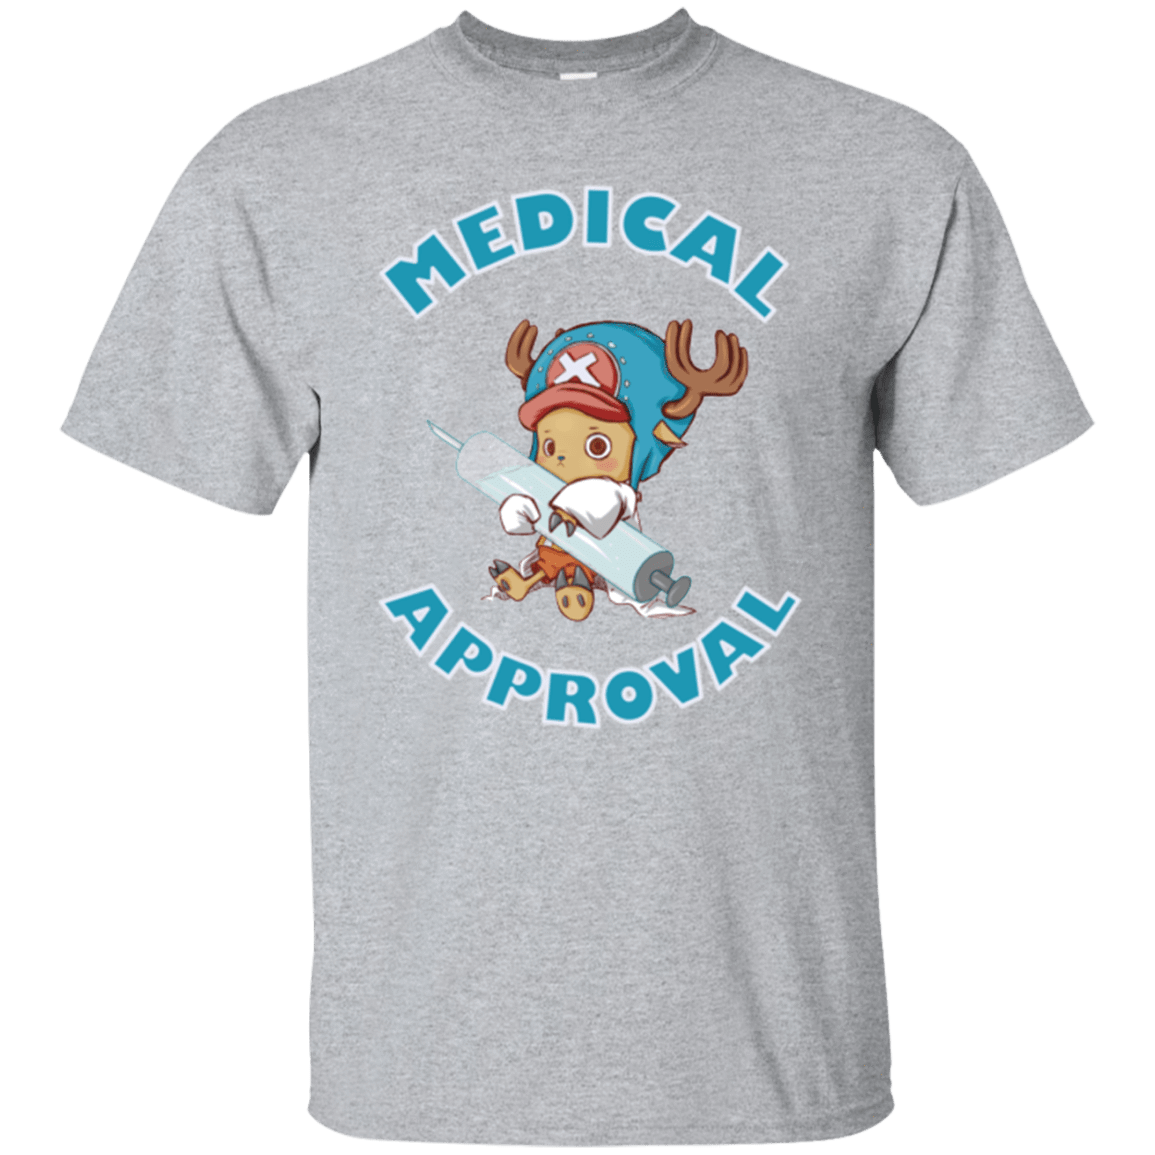 T-Shirts Sport Grey / Small Medical approval T-Shirt